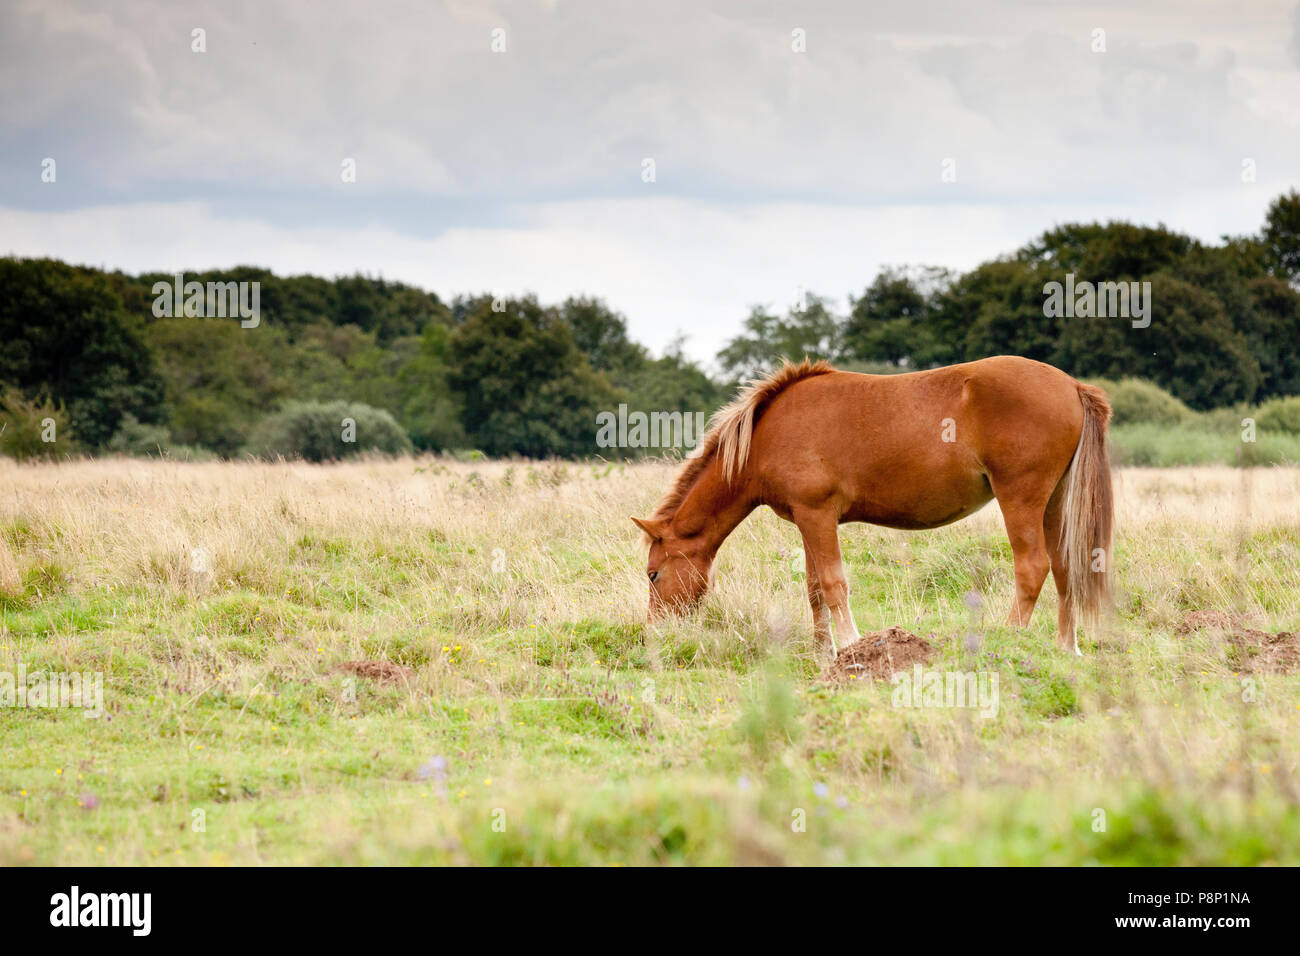 Horses graze at the Junner koelanden, a grassland within an old meander of the river Vecht. Stock Photo